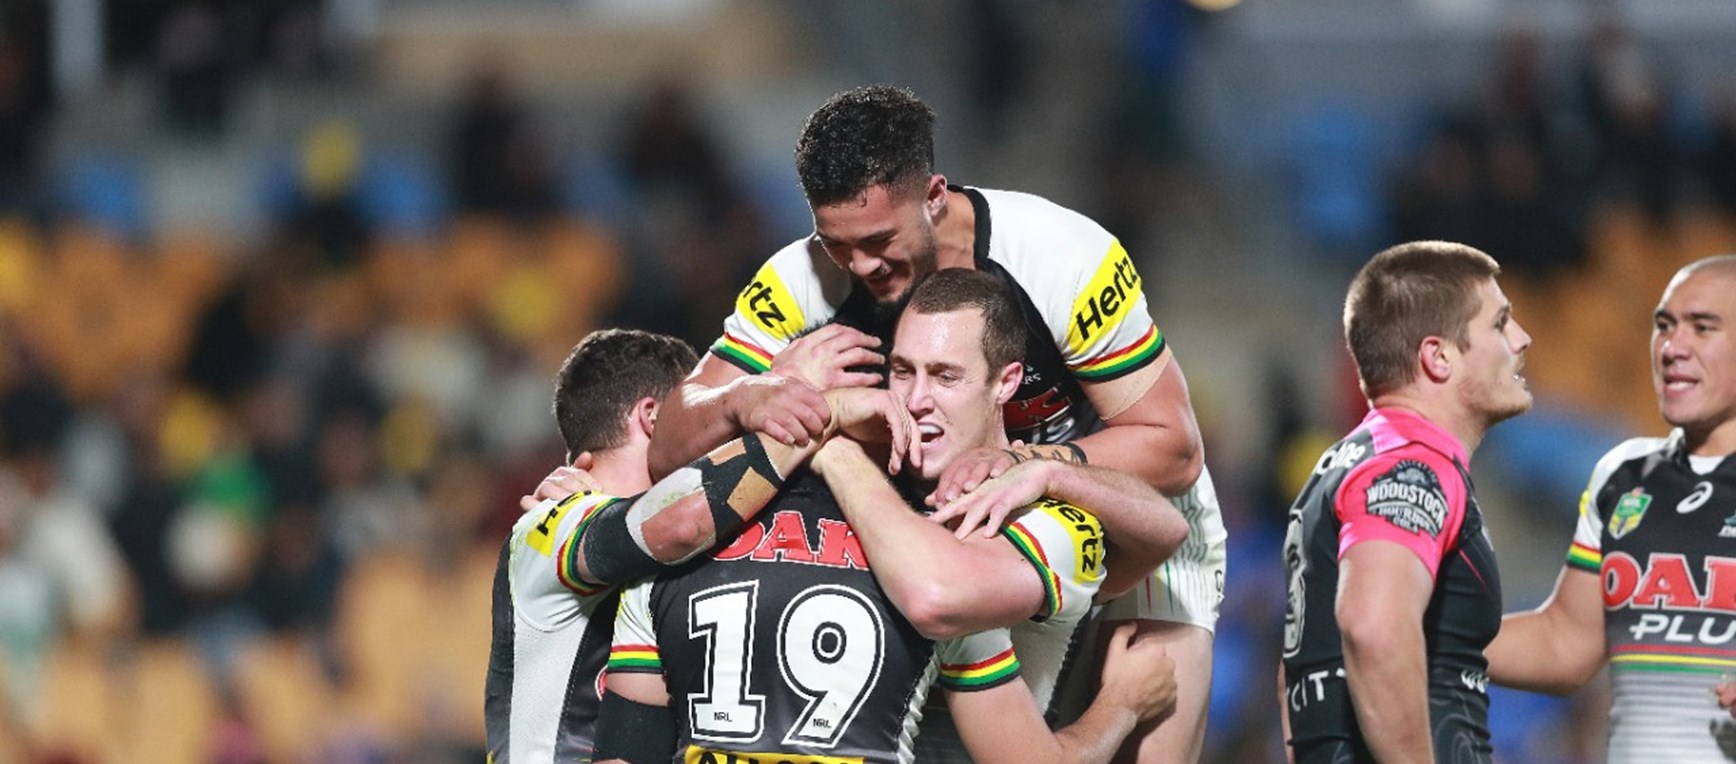 Gallery: Panthers v Warriors